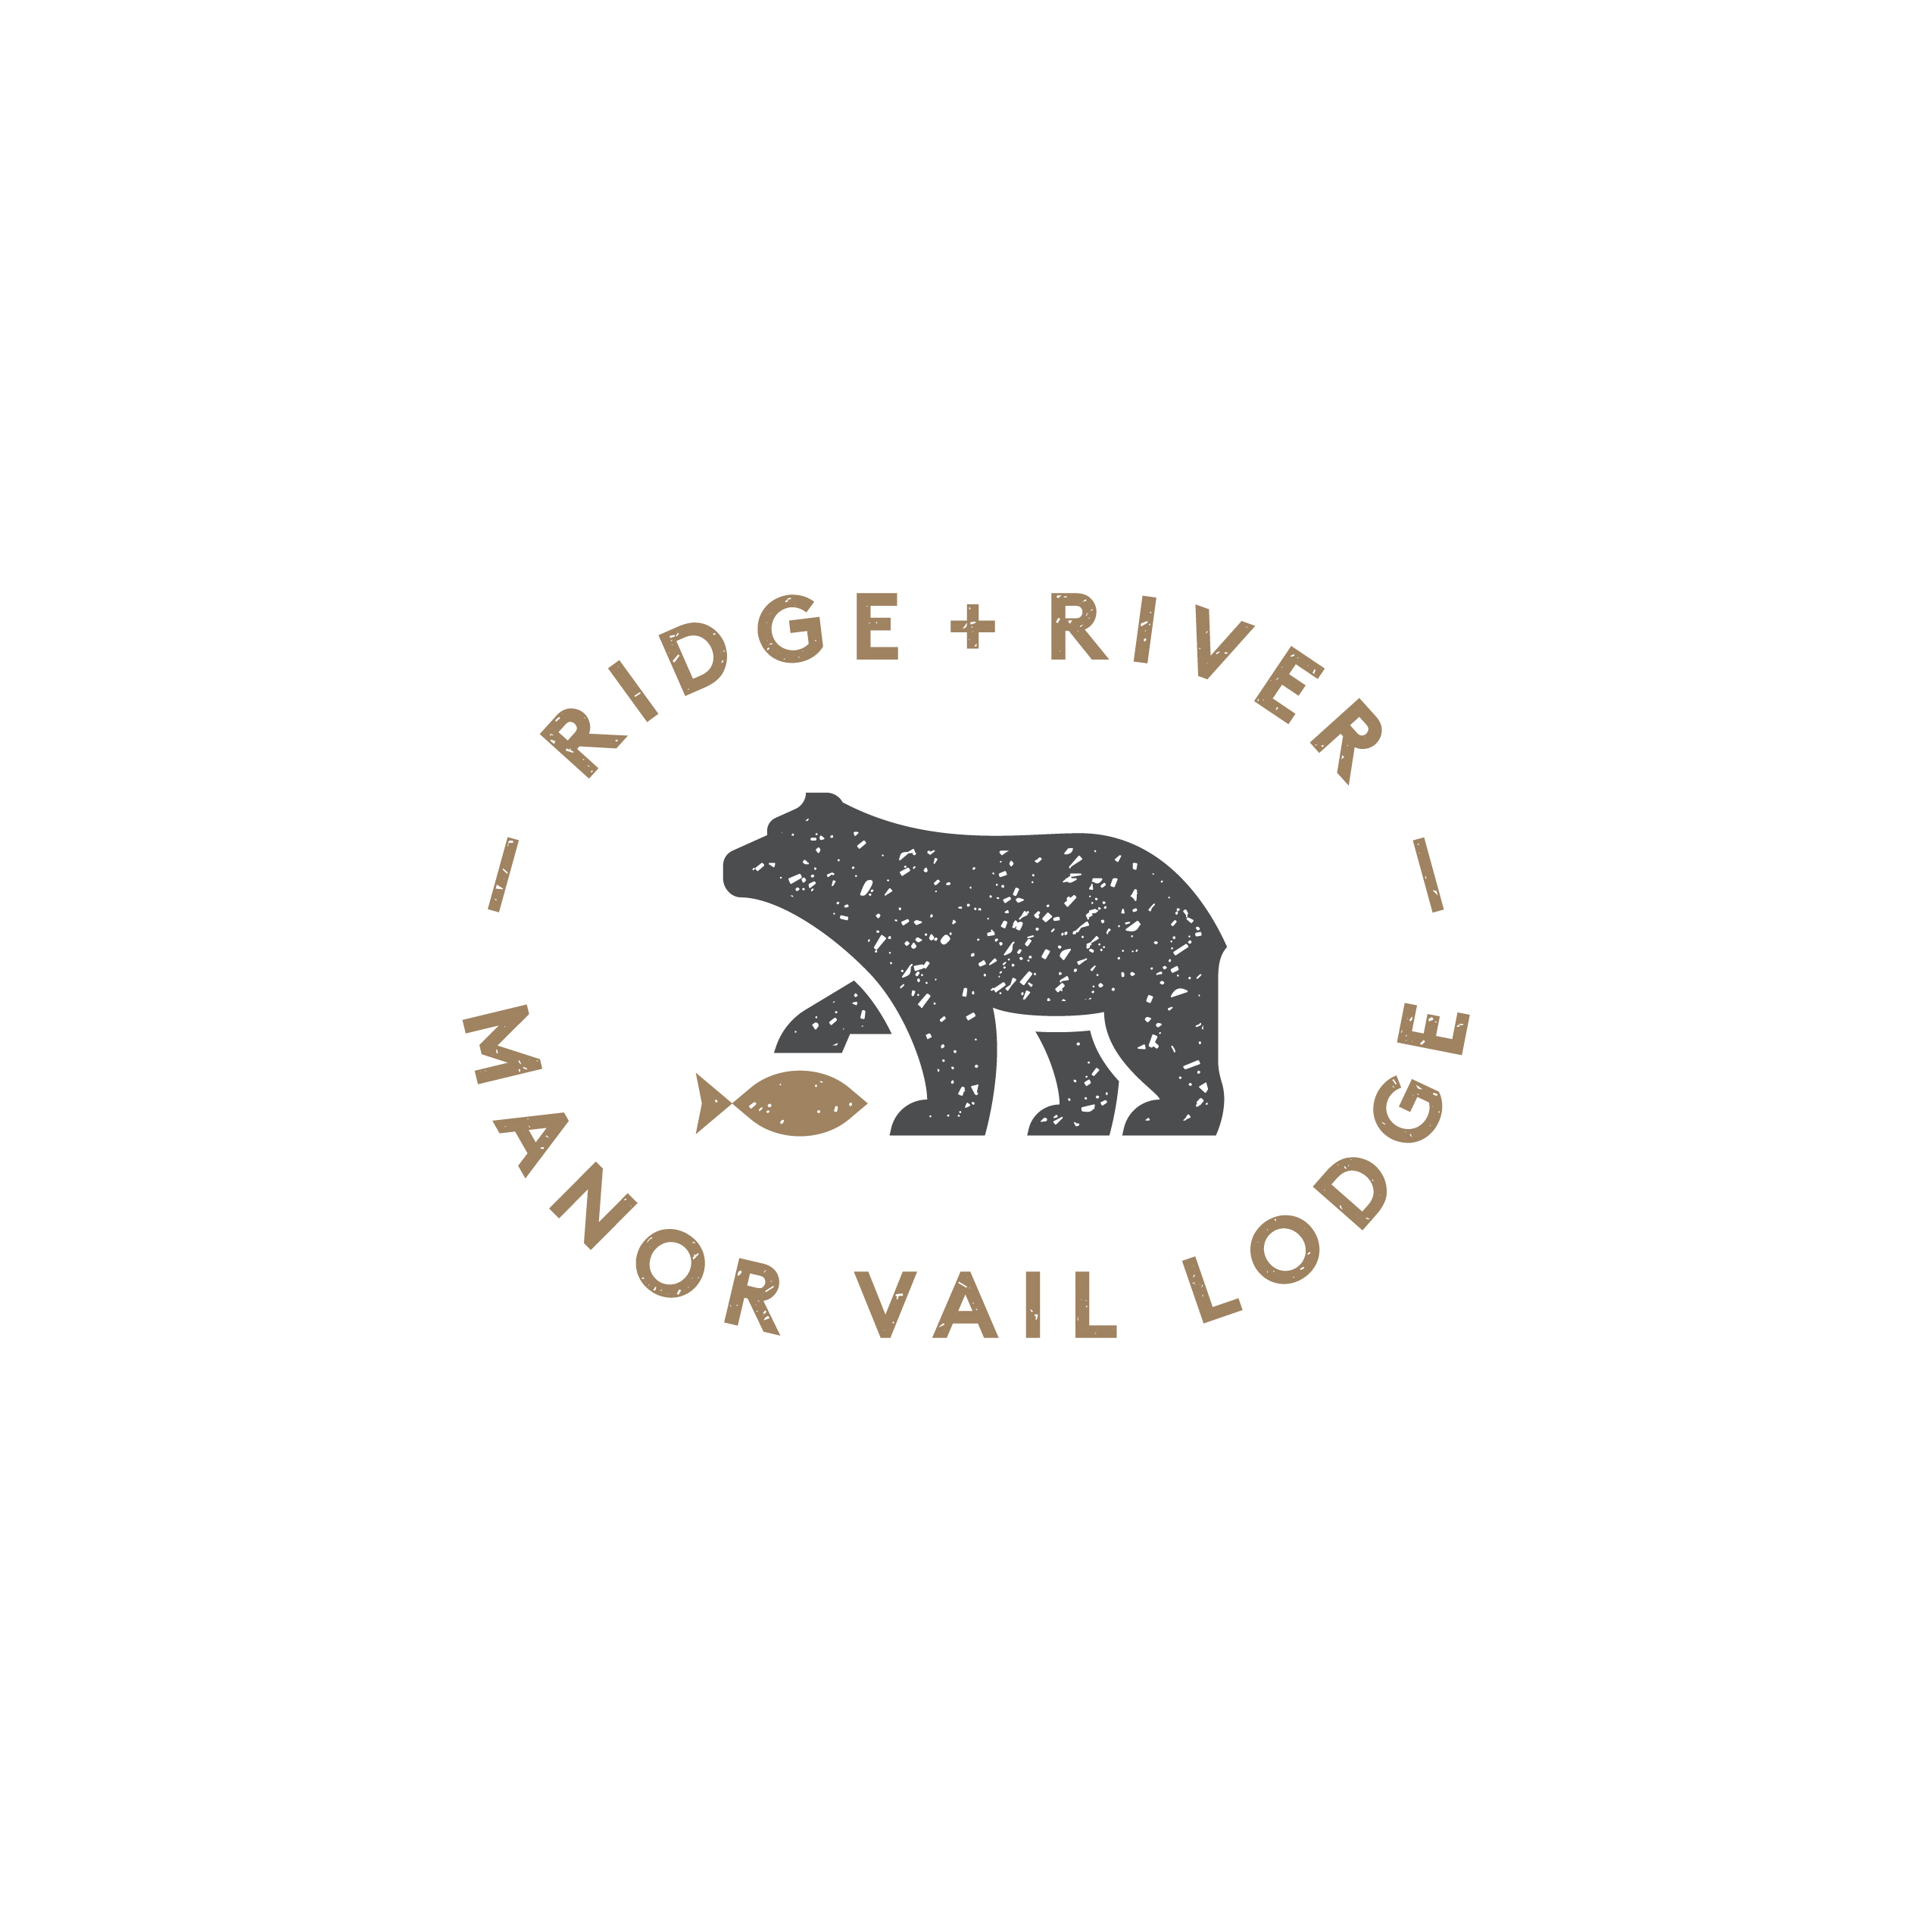 Ridge + River logo design by logo designer Banowetz + Company, Inc. for your inspiration and for the worlds largest logo competition